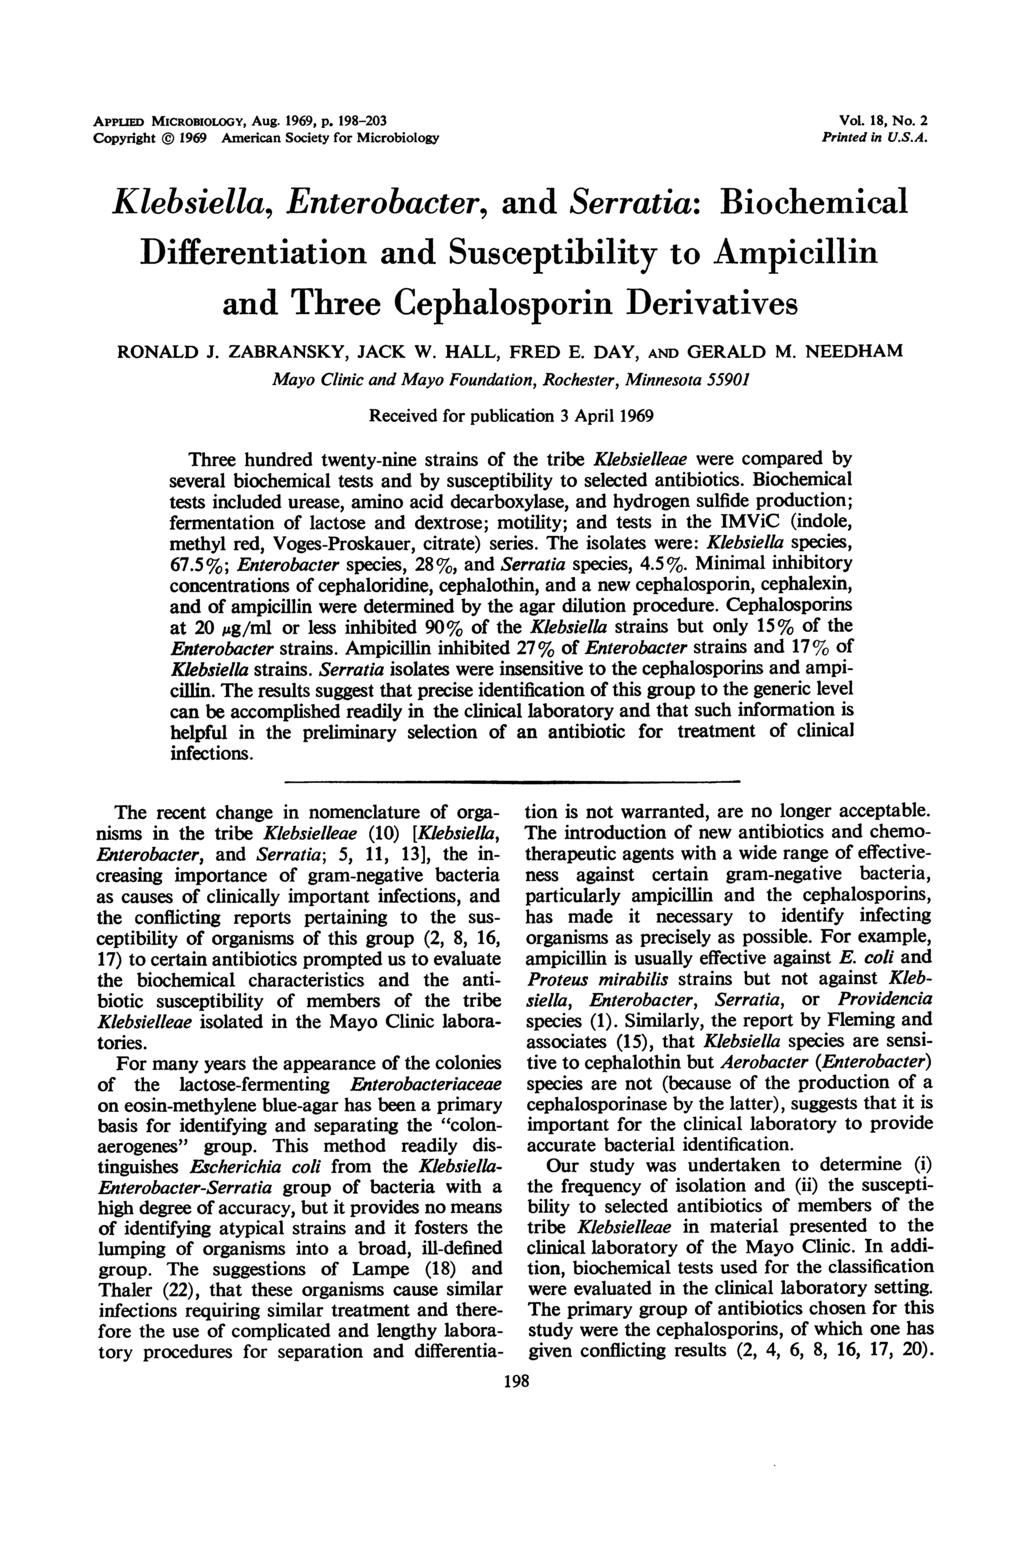 APPLIED MICROBIOLOGY, Aug. 1969, p. 198-203 Copyright 1969 American Society for Microbiology Klebsiella, Enterobacter, and Serratia: Vol. 18, No. 2 Printed in U.S.A. Biochemical Differentiation and Susceptibility to Ampicillin and Three Cephalosporin Derivatives RONALD J.